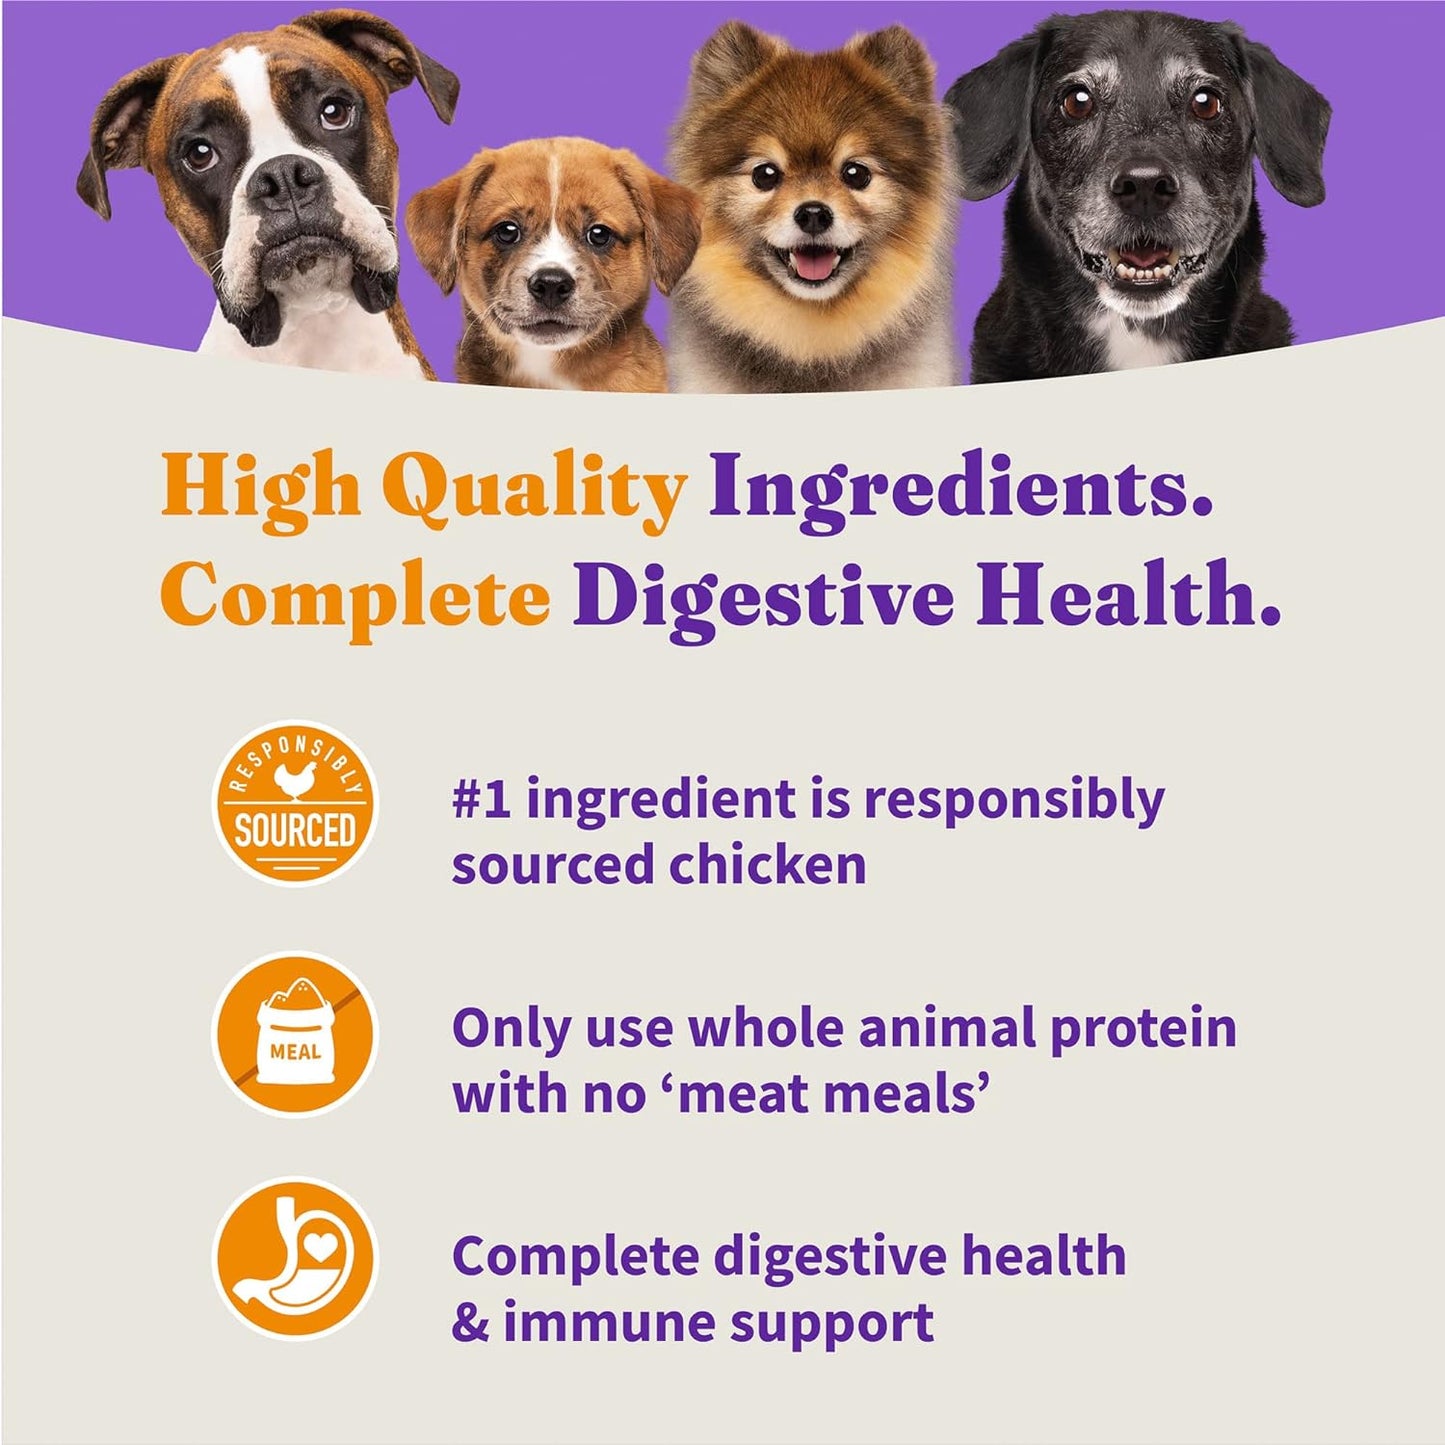 Holistic Healthy Grains Cage-Free Chicken & Brown Rice Recipe Puppy Dry Food